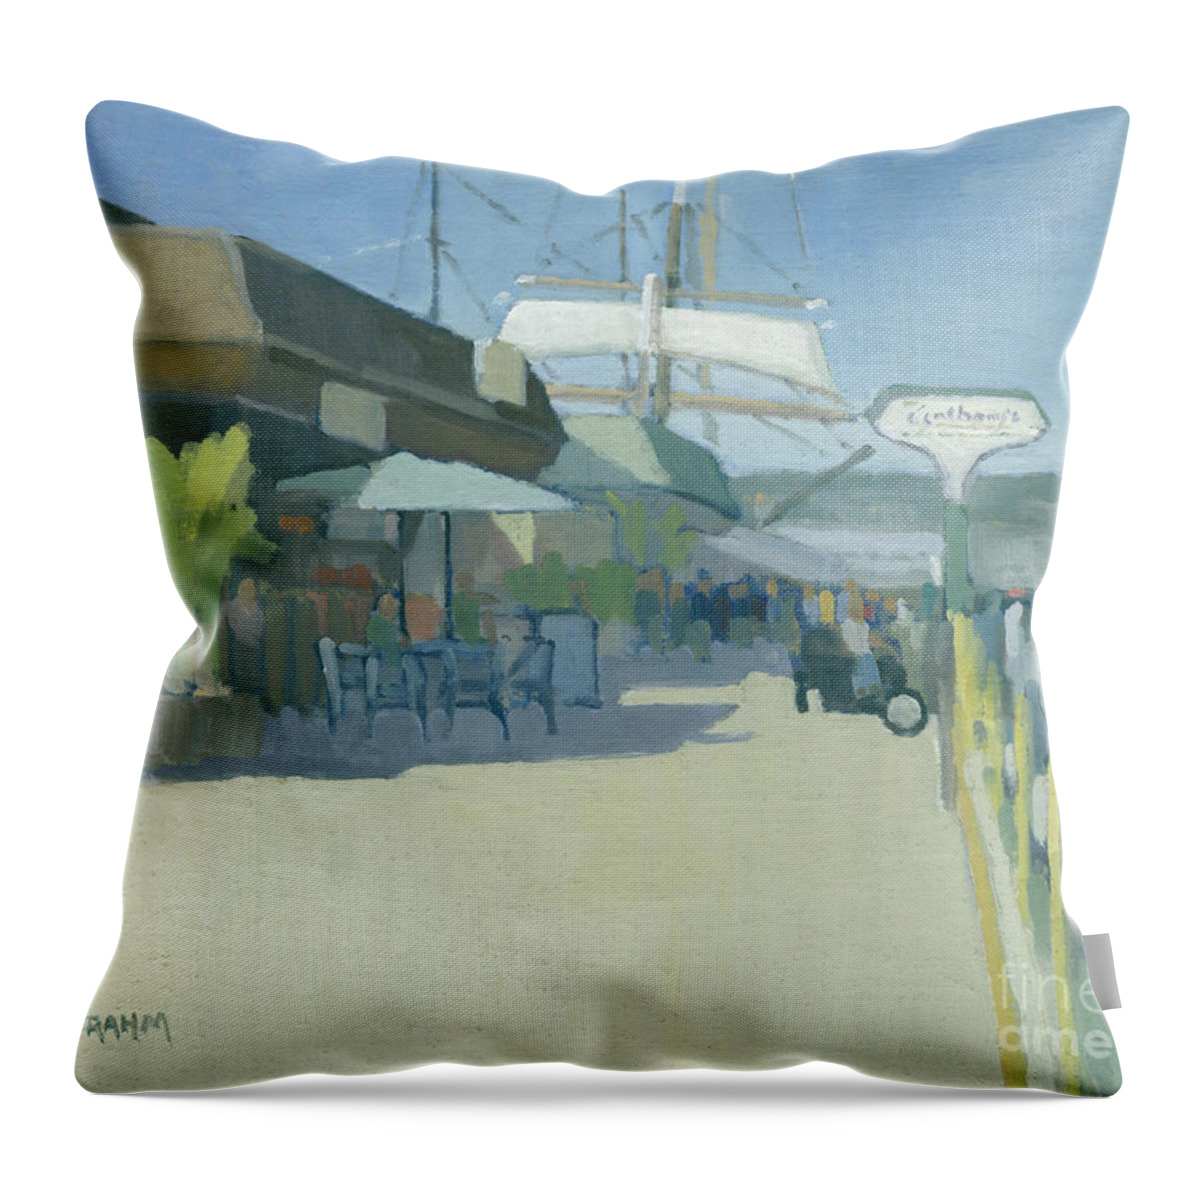 Anthony's Fish Grotto Throw Pillow featuring the painting Anthony's Fish Grotto - Downtown, San Diego, California by Paul Strahm